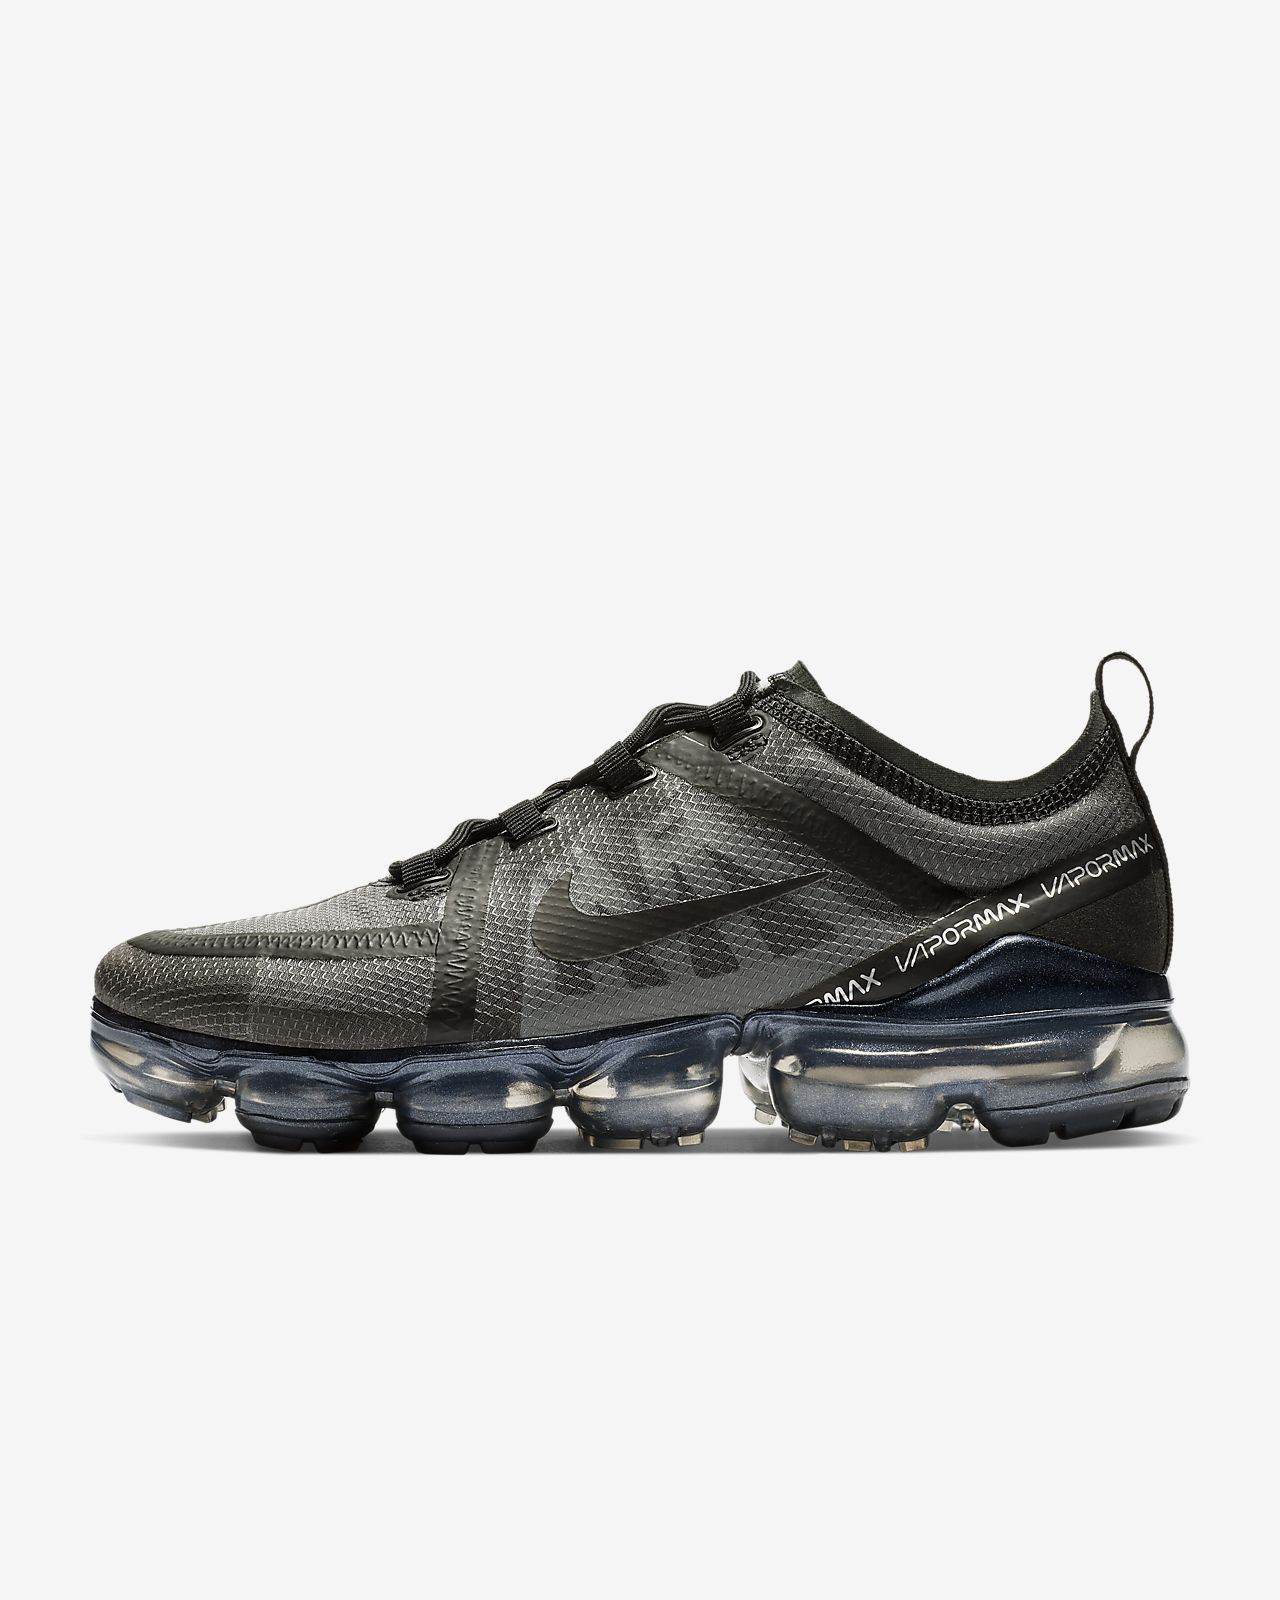 nike vapormax 2019 outlet store 0244a 5983b